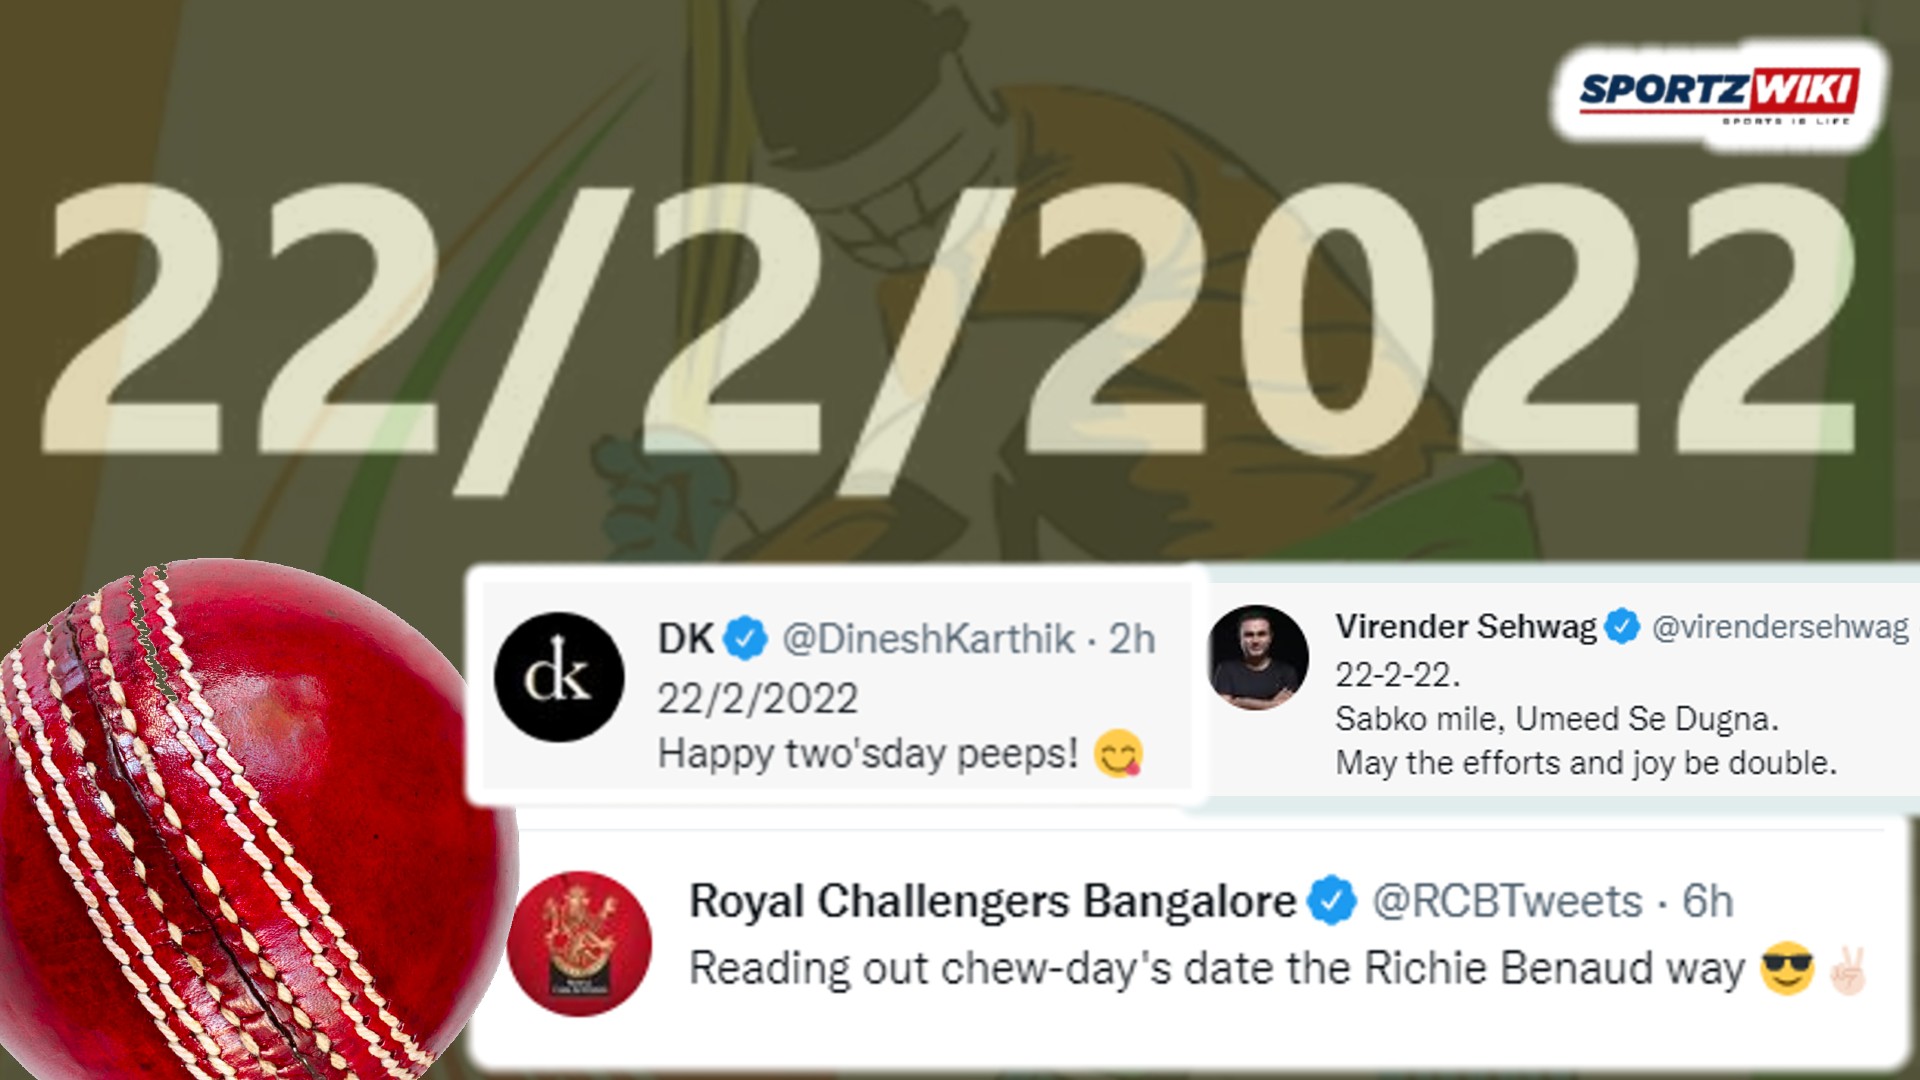 funny tweet of indian cricketers on 22022022 palindrome and ambigram date